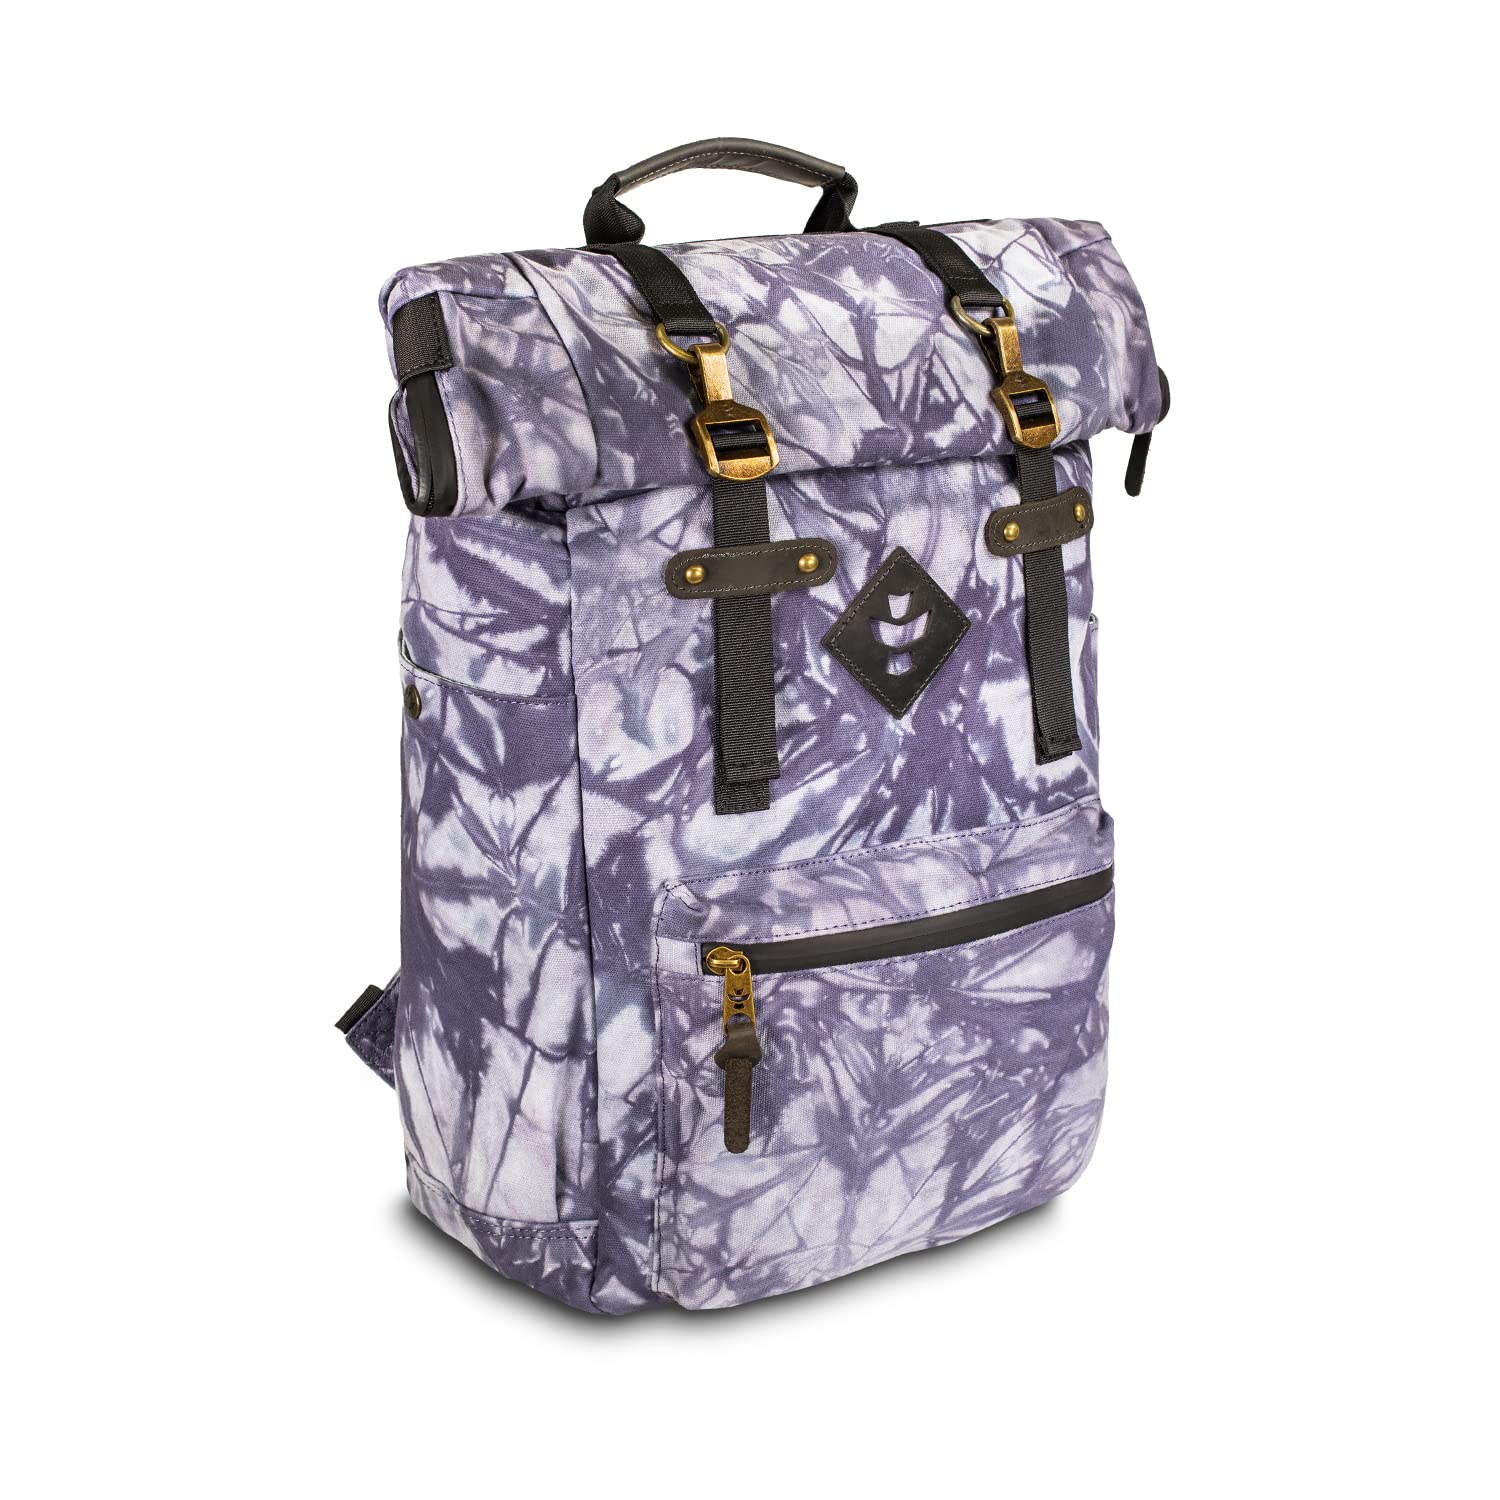 Revelry Supply The Drifter - Smell Proof Water Resistant Lockable Rolltop Travel Backpack for Outdoors Nature Exploring